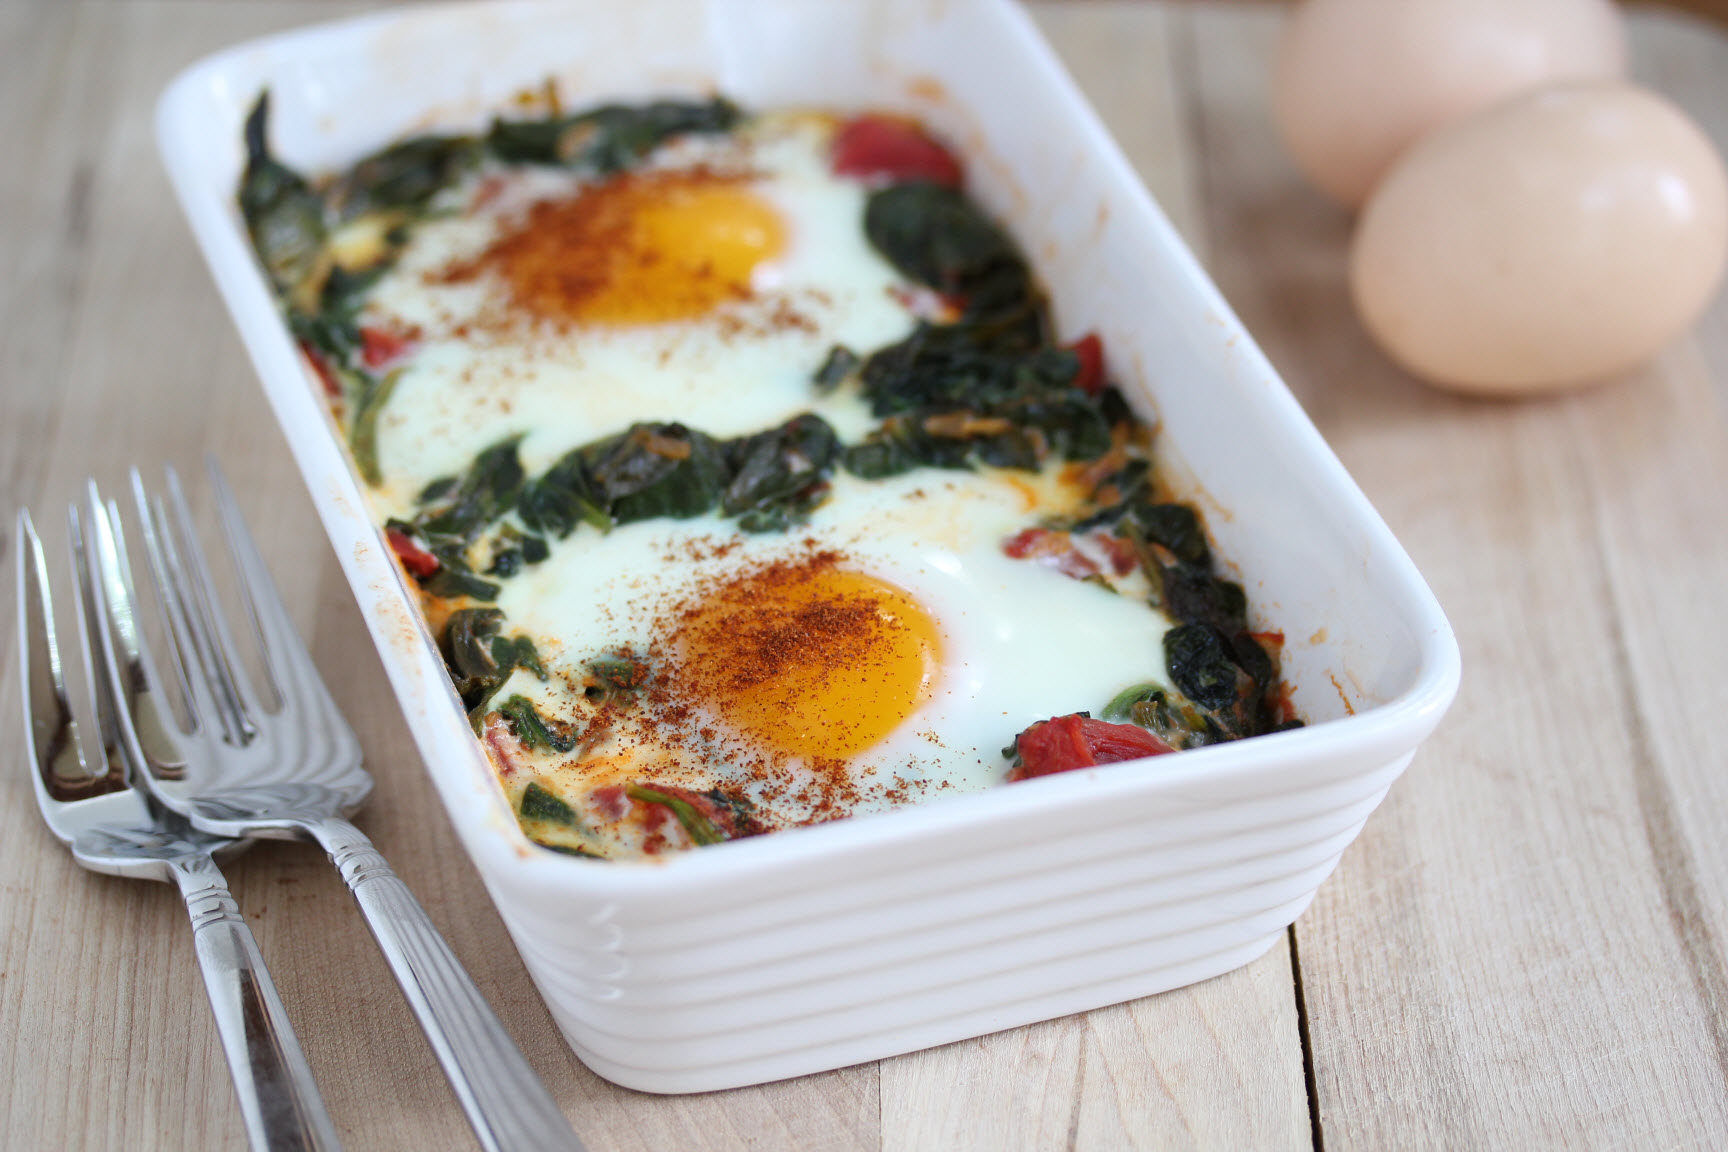 5. Baked Eggs with Spinach and Tomato